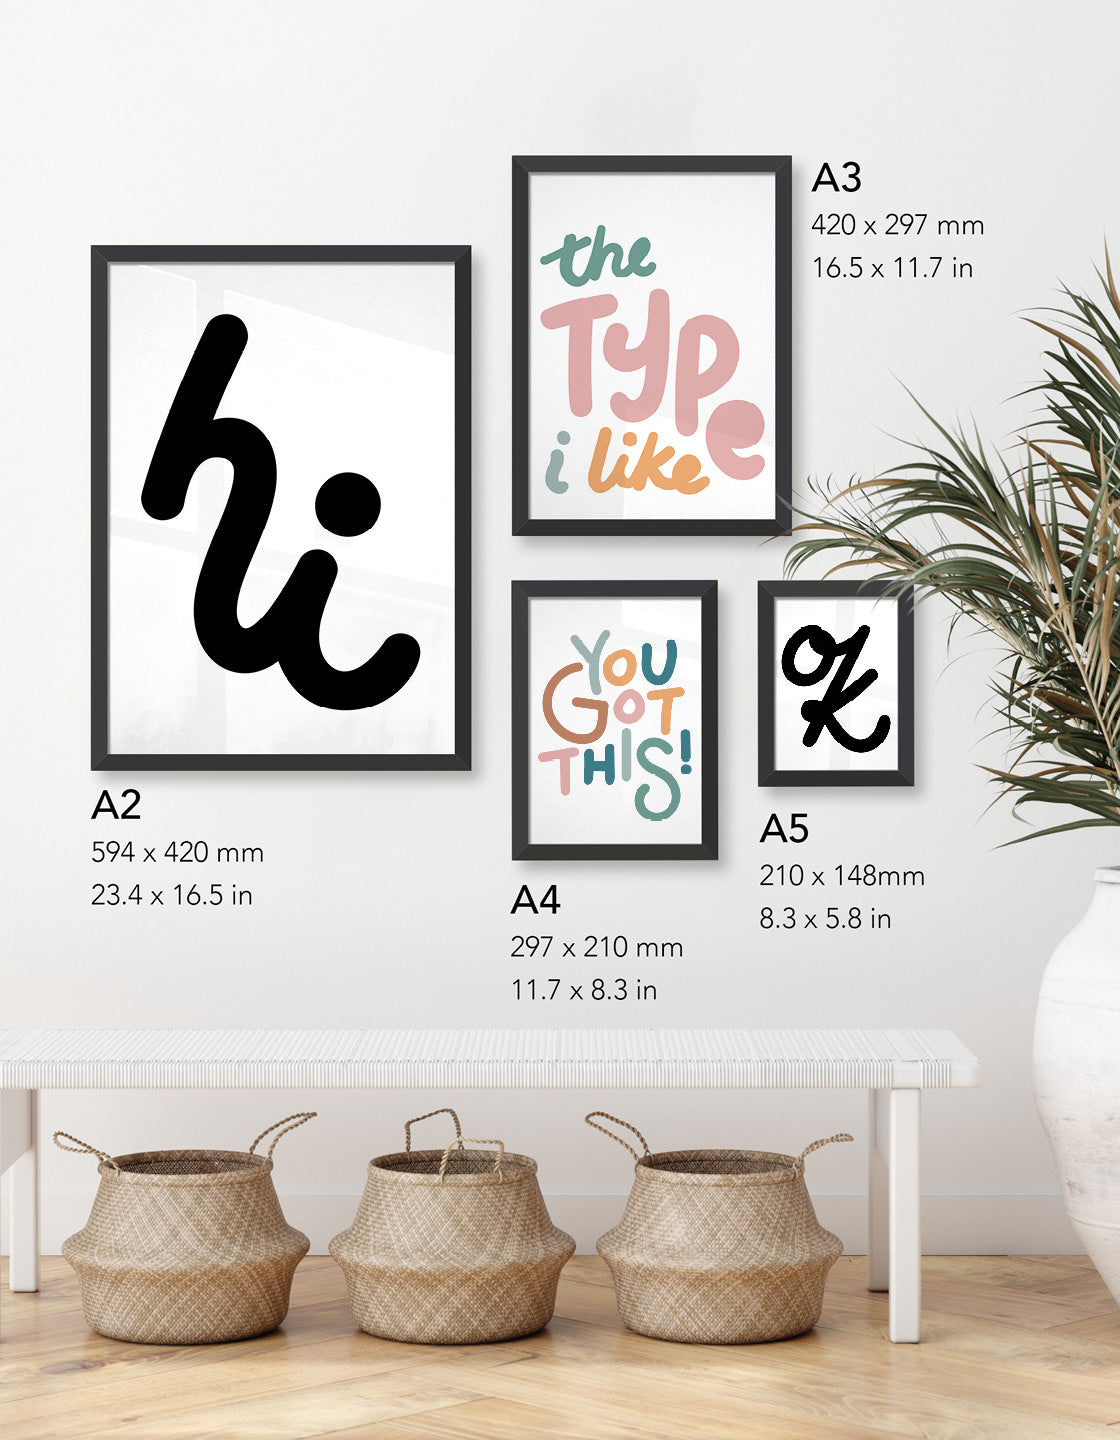 Example gallery wall image showcasing typography prints in varying sizes